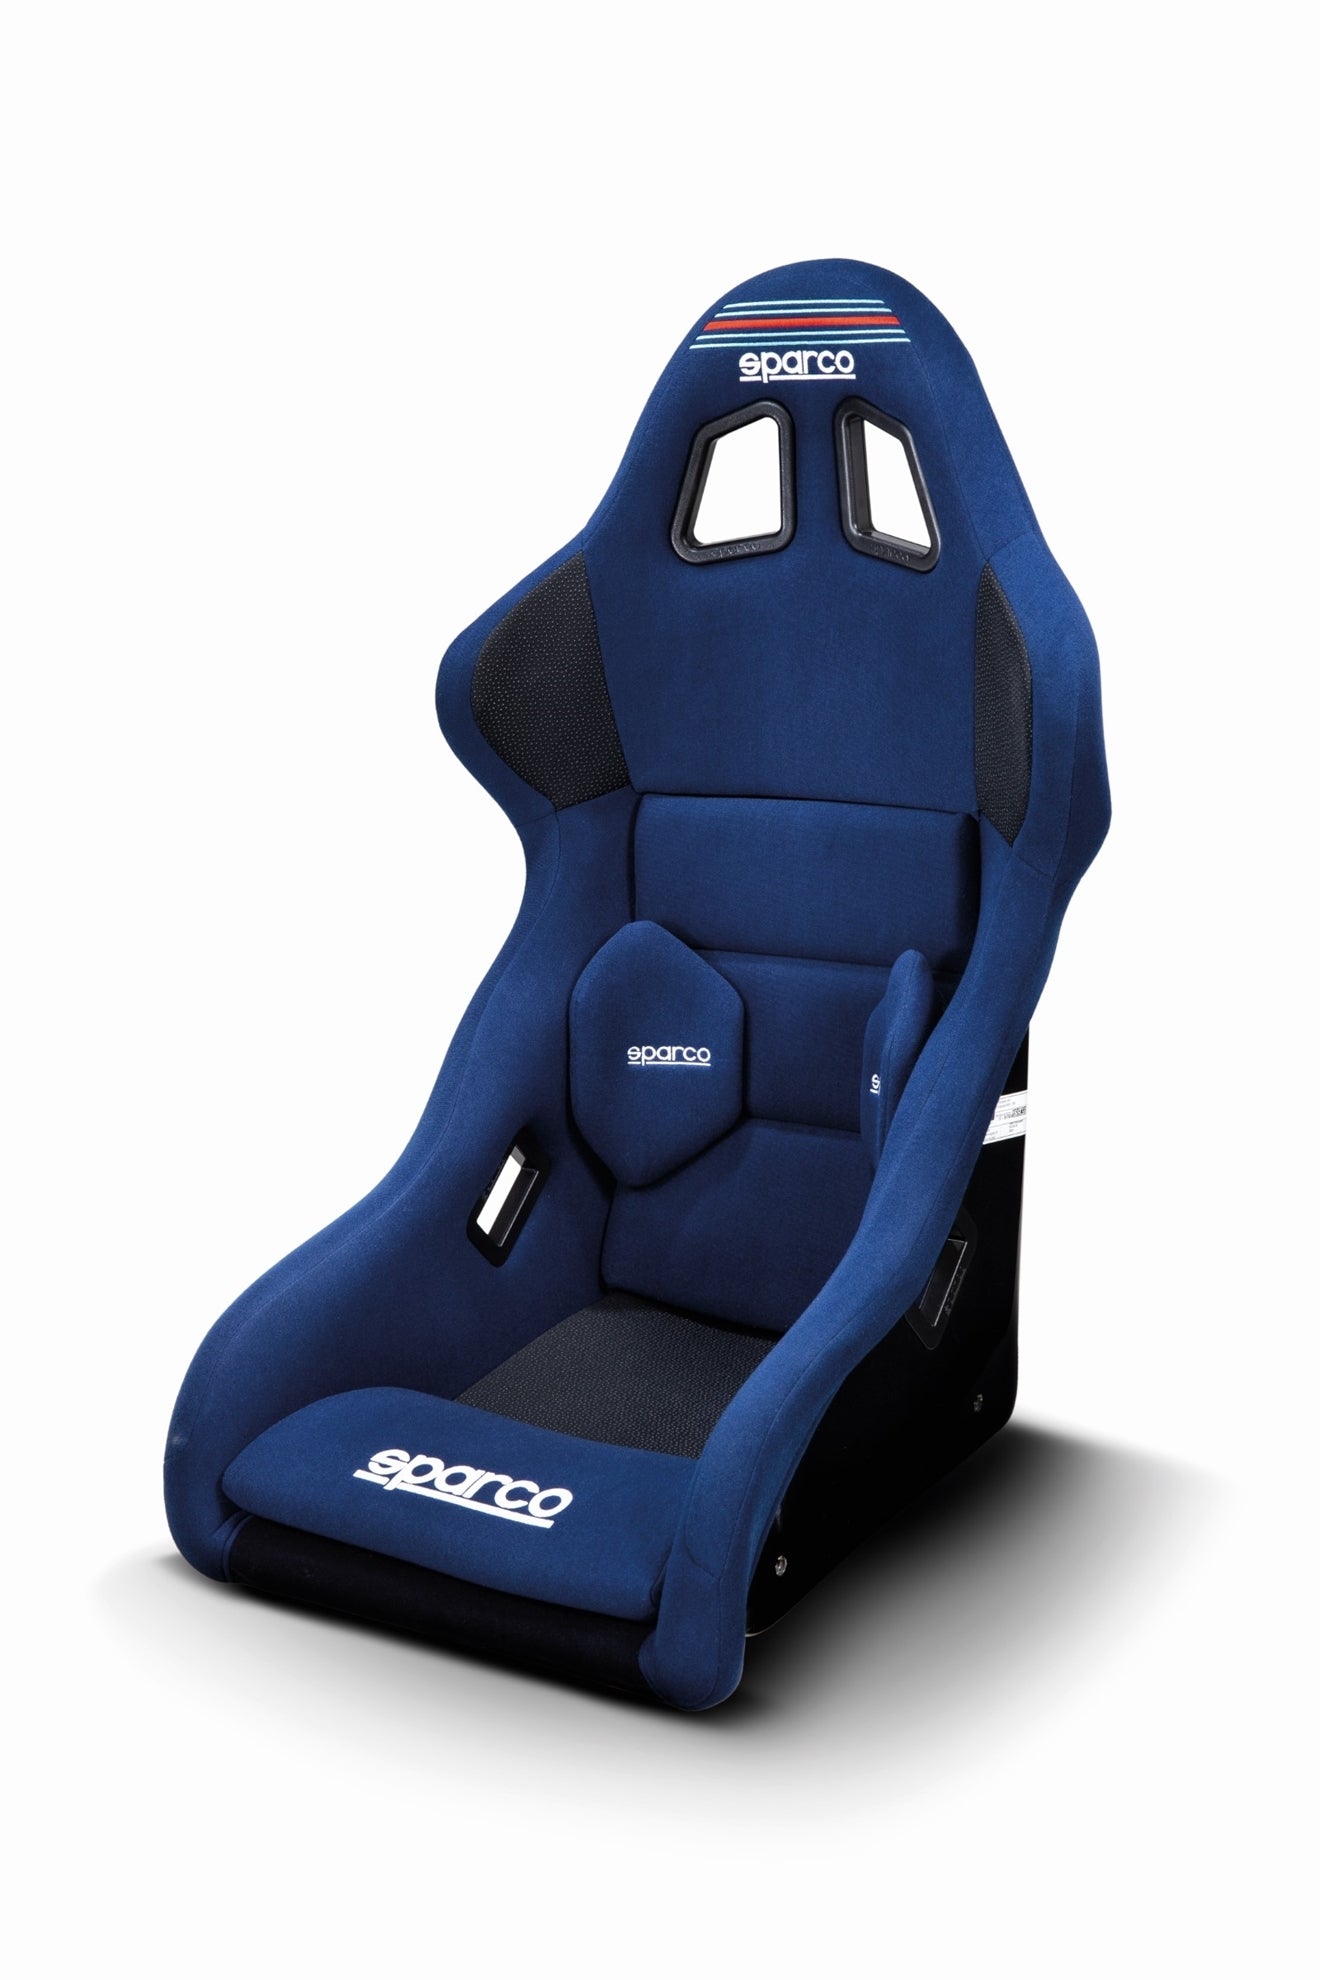 SPARCO COMPETITION SEAT: PRO 2000 MARTINI RACING